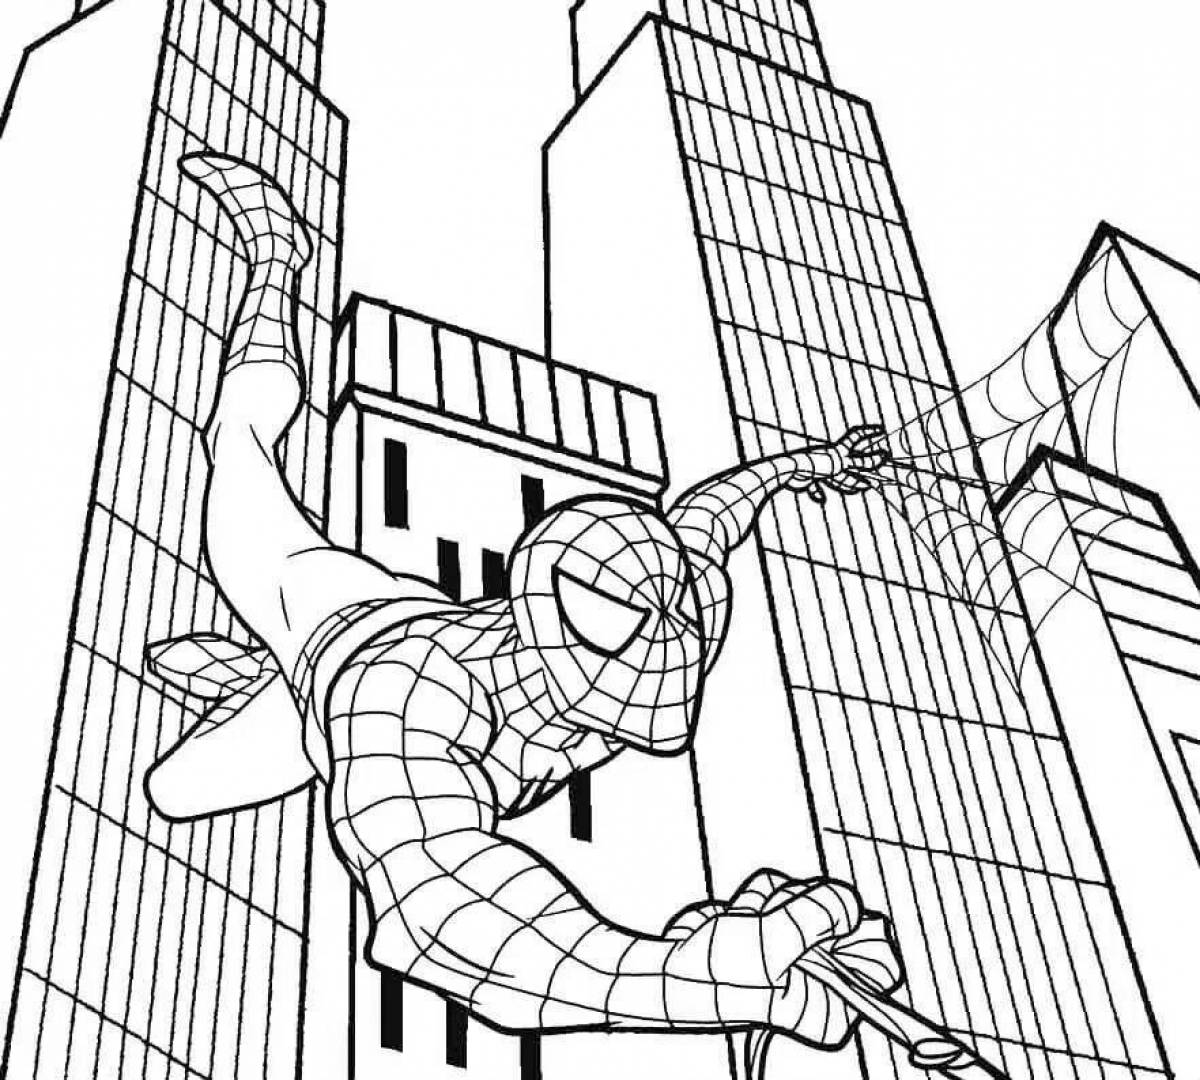 Spiderman animated coloring book